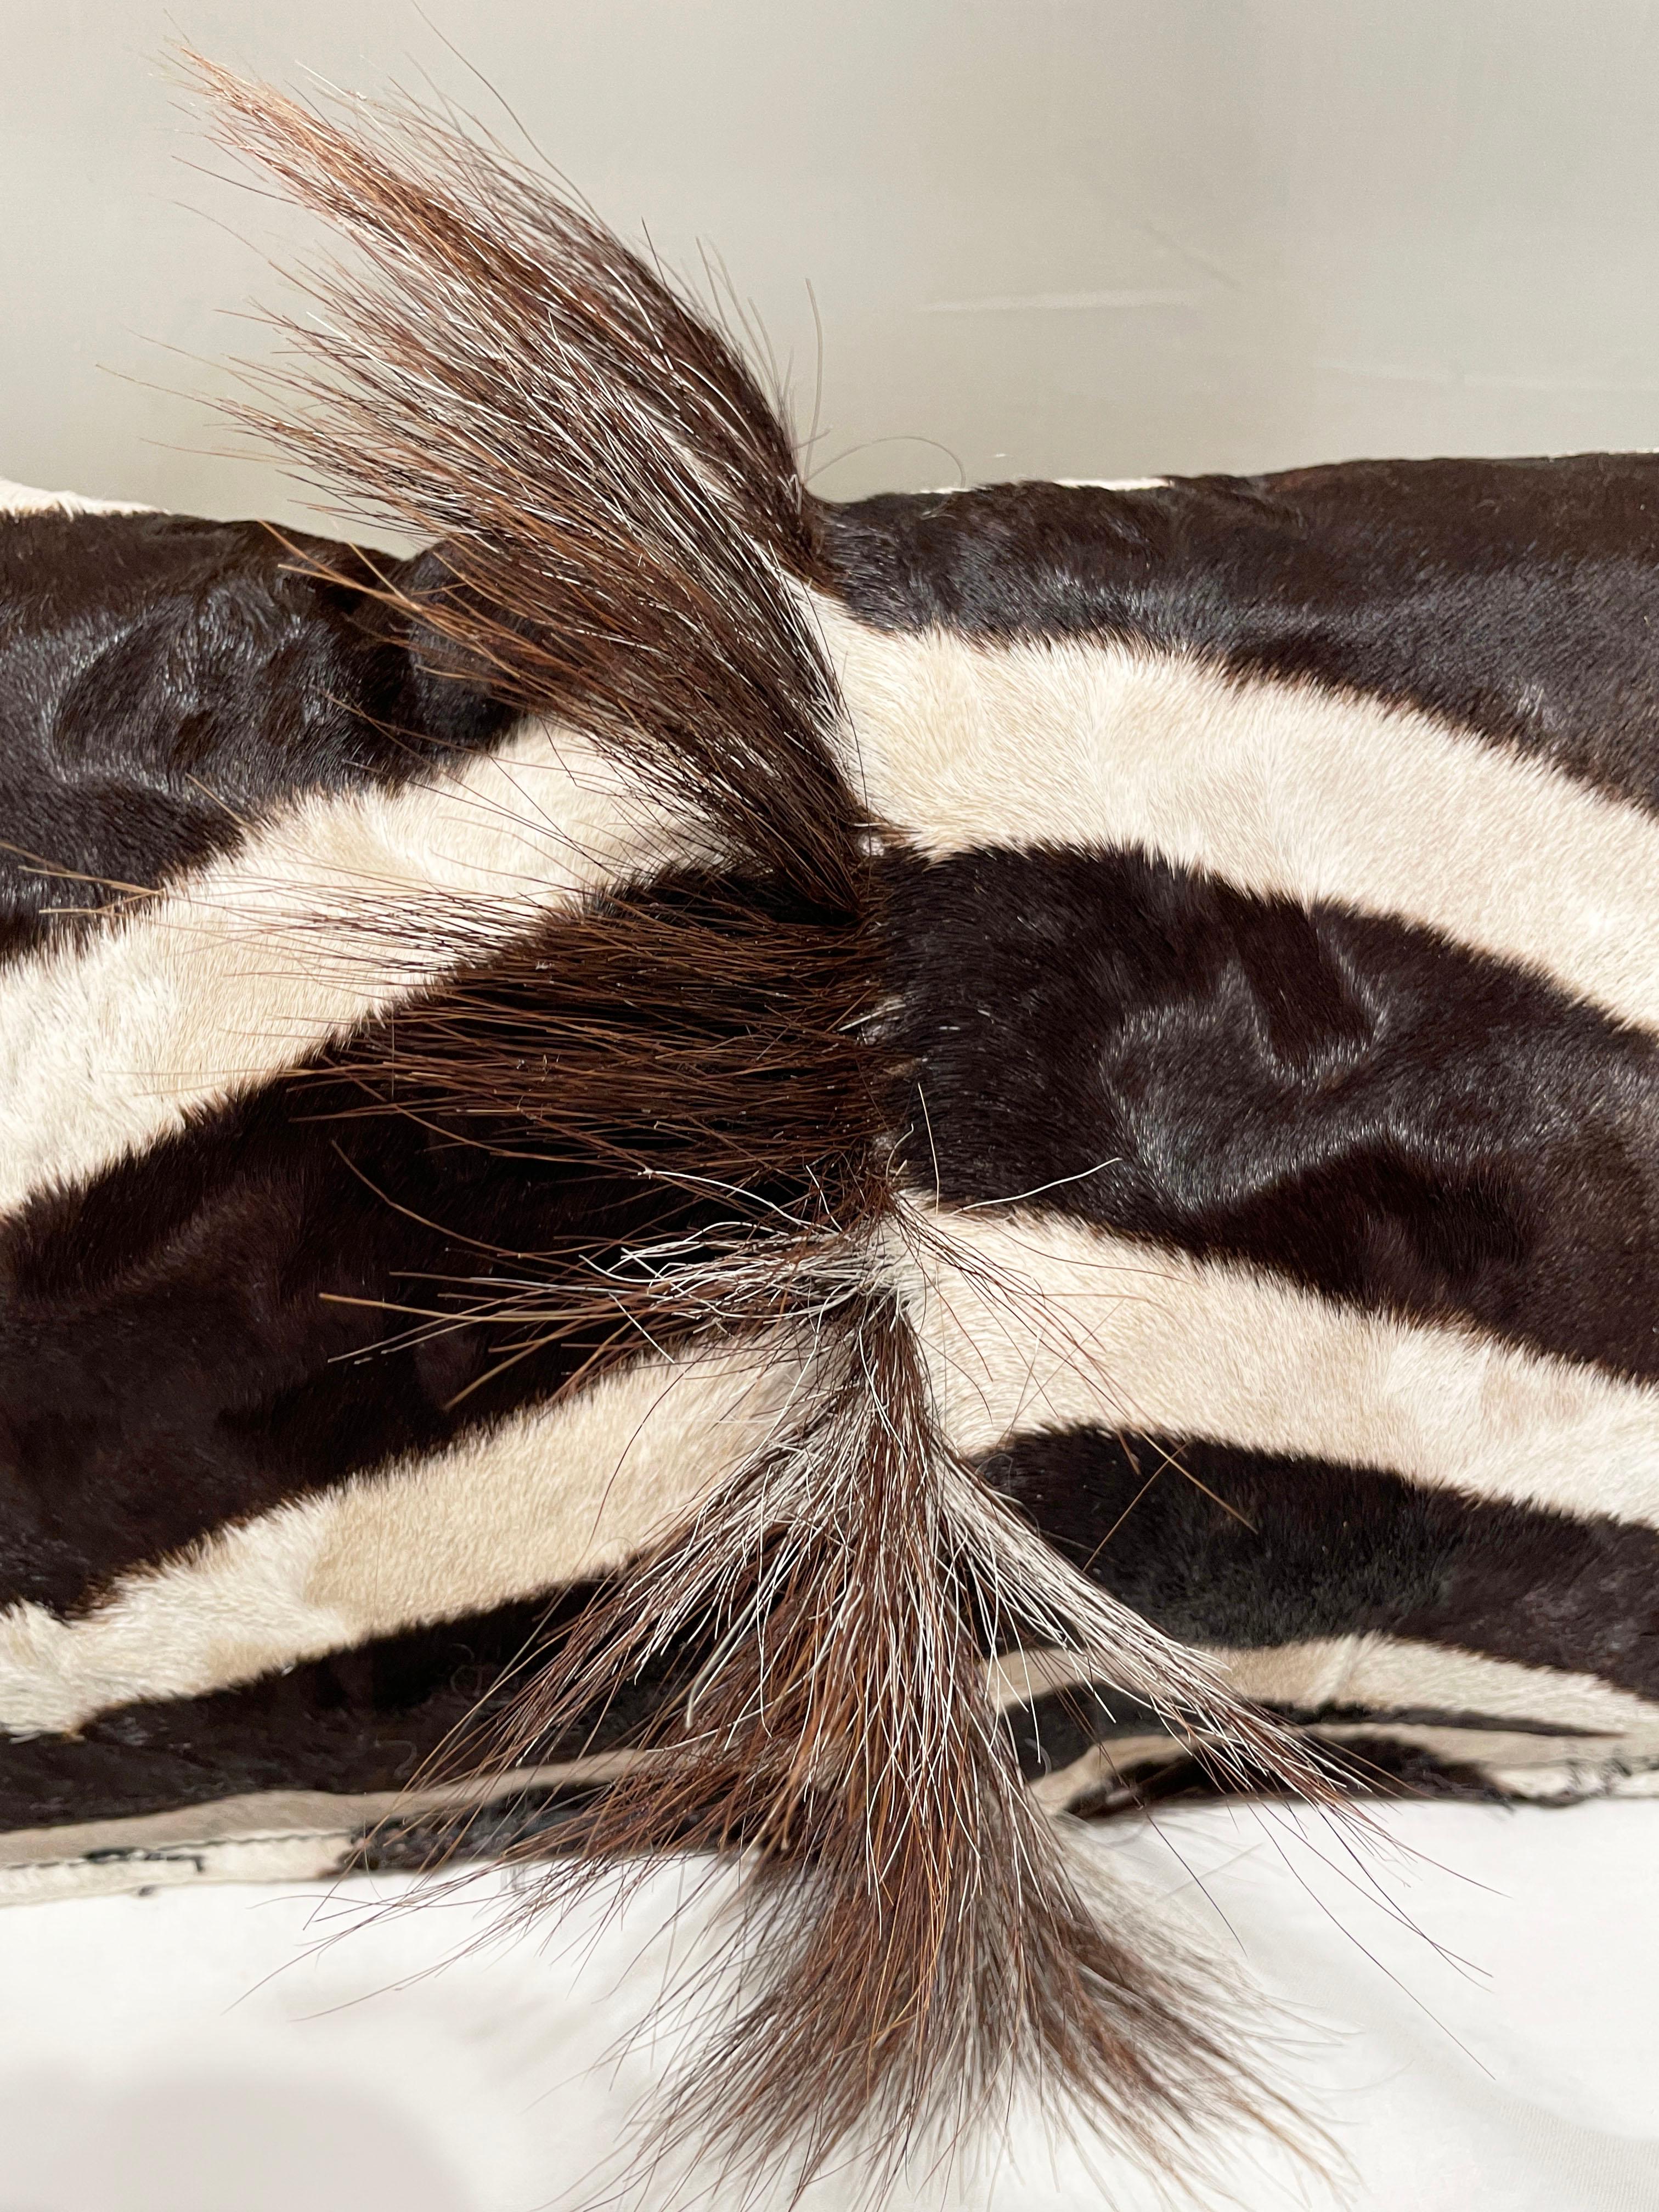 Authentic vintage Zebra pillow - fur on both sides. a wonderful piece to add texture and dimension to any seat.